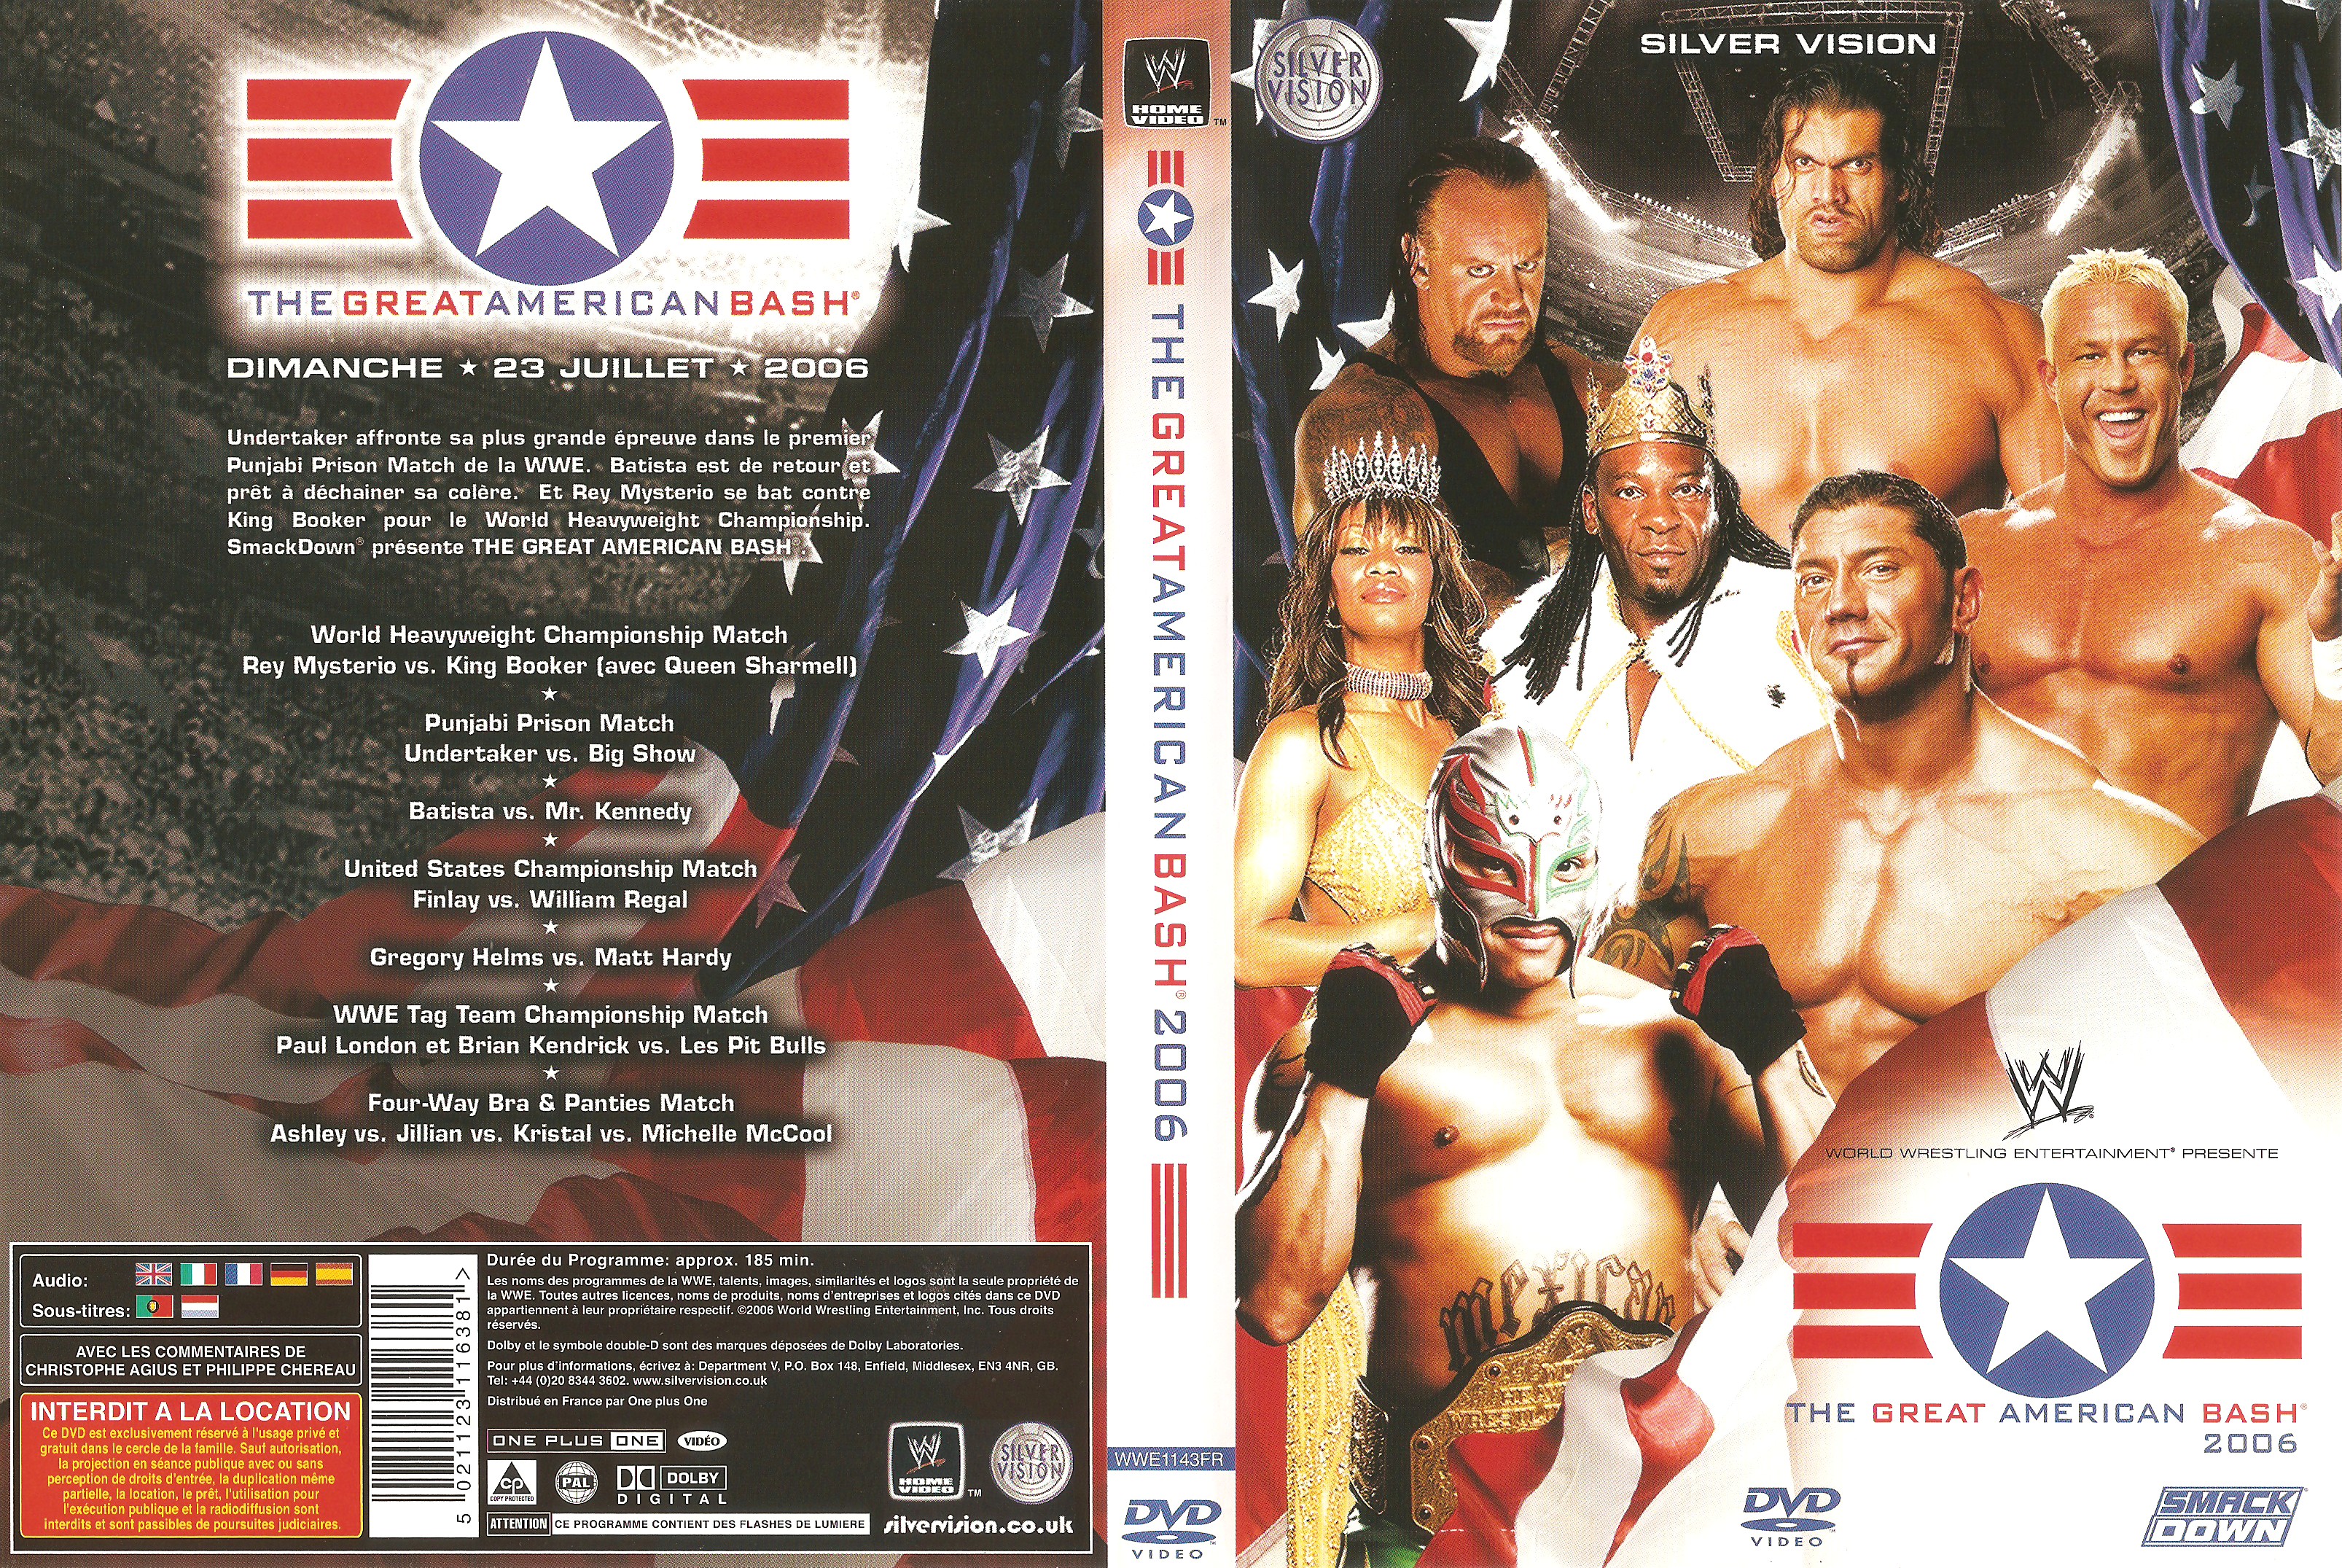 Jaquette DVD WWE The Great American Bash 2006